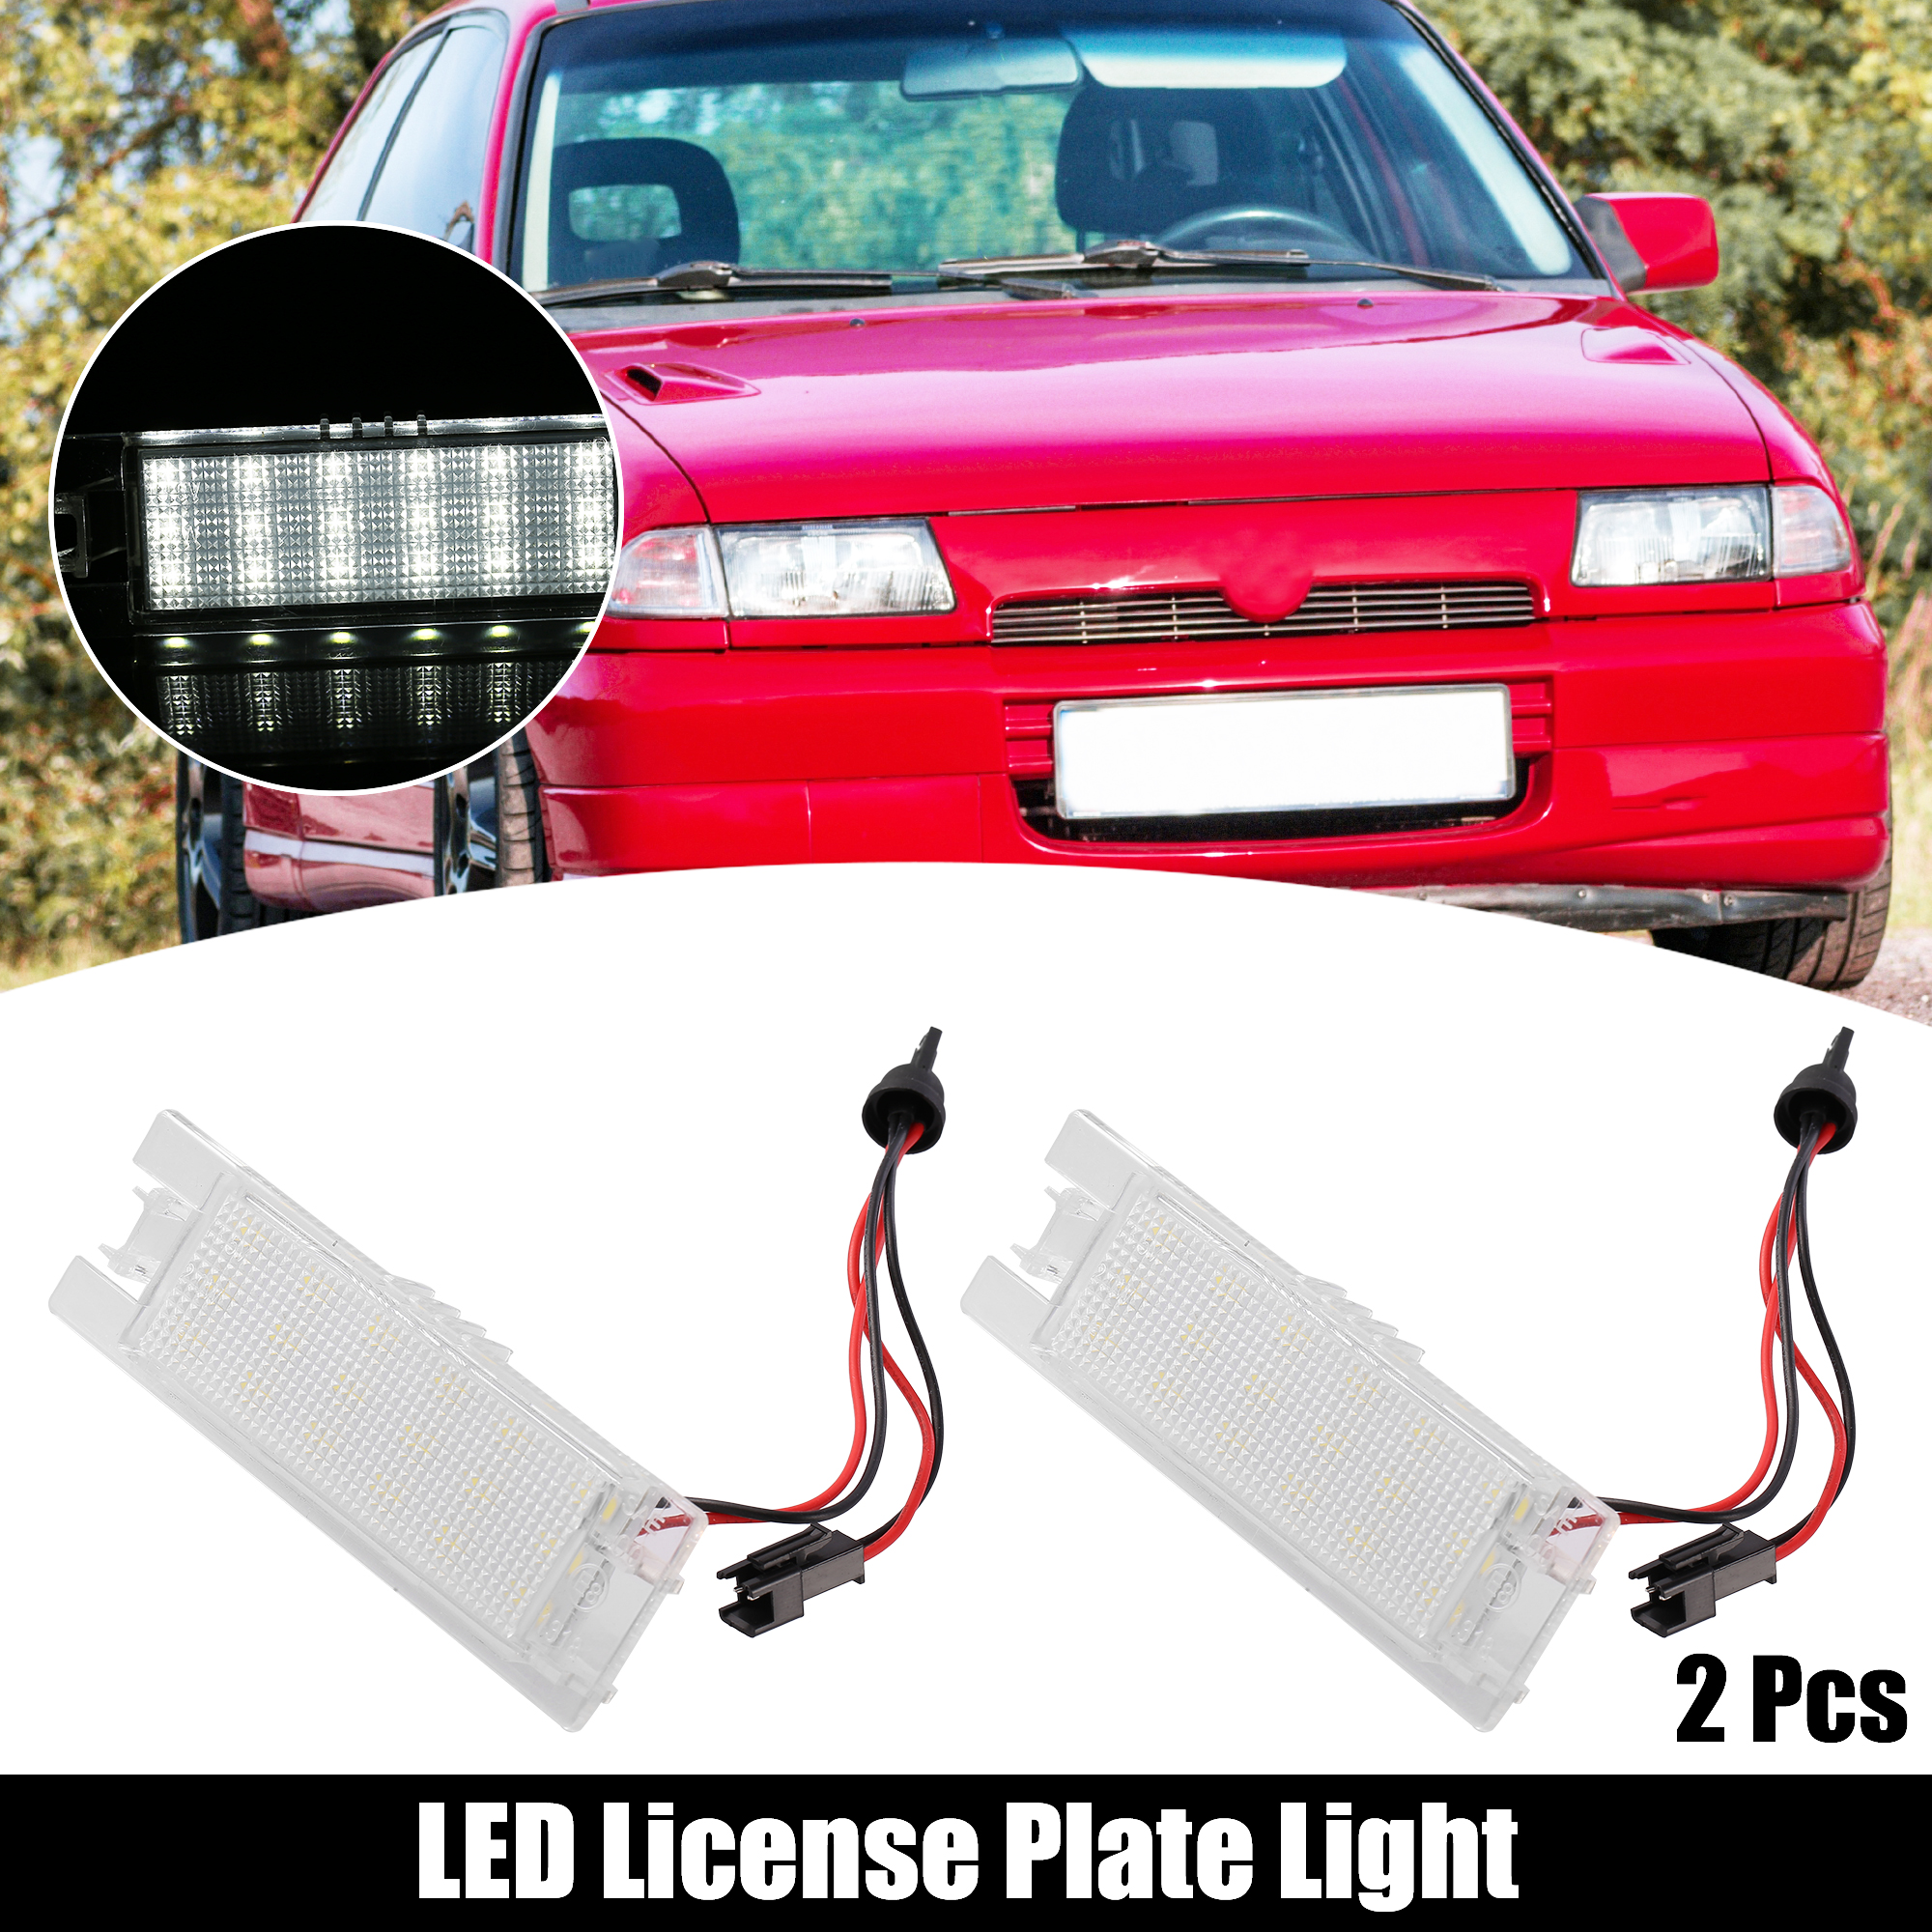 Unique Bargains 2pcs Car LED License Plate Light White Light for Opel for Astra Corsa Insignia